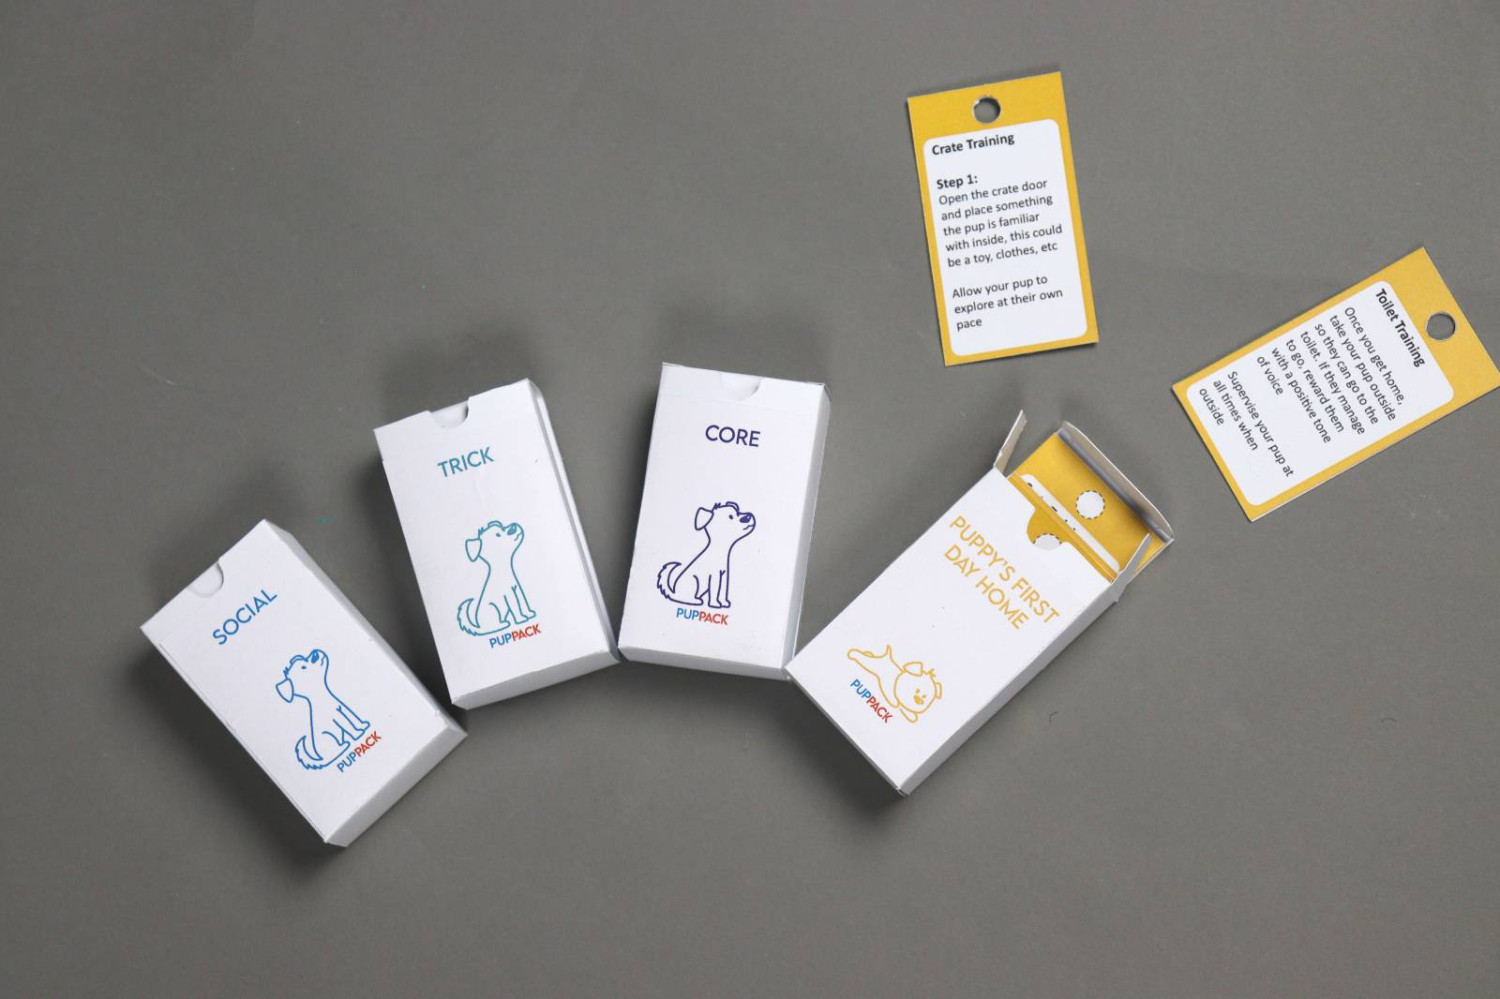 The current *Pup Pack* includes a 'Puppy's first day home' pack, to help owners ease their new friend into their home.